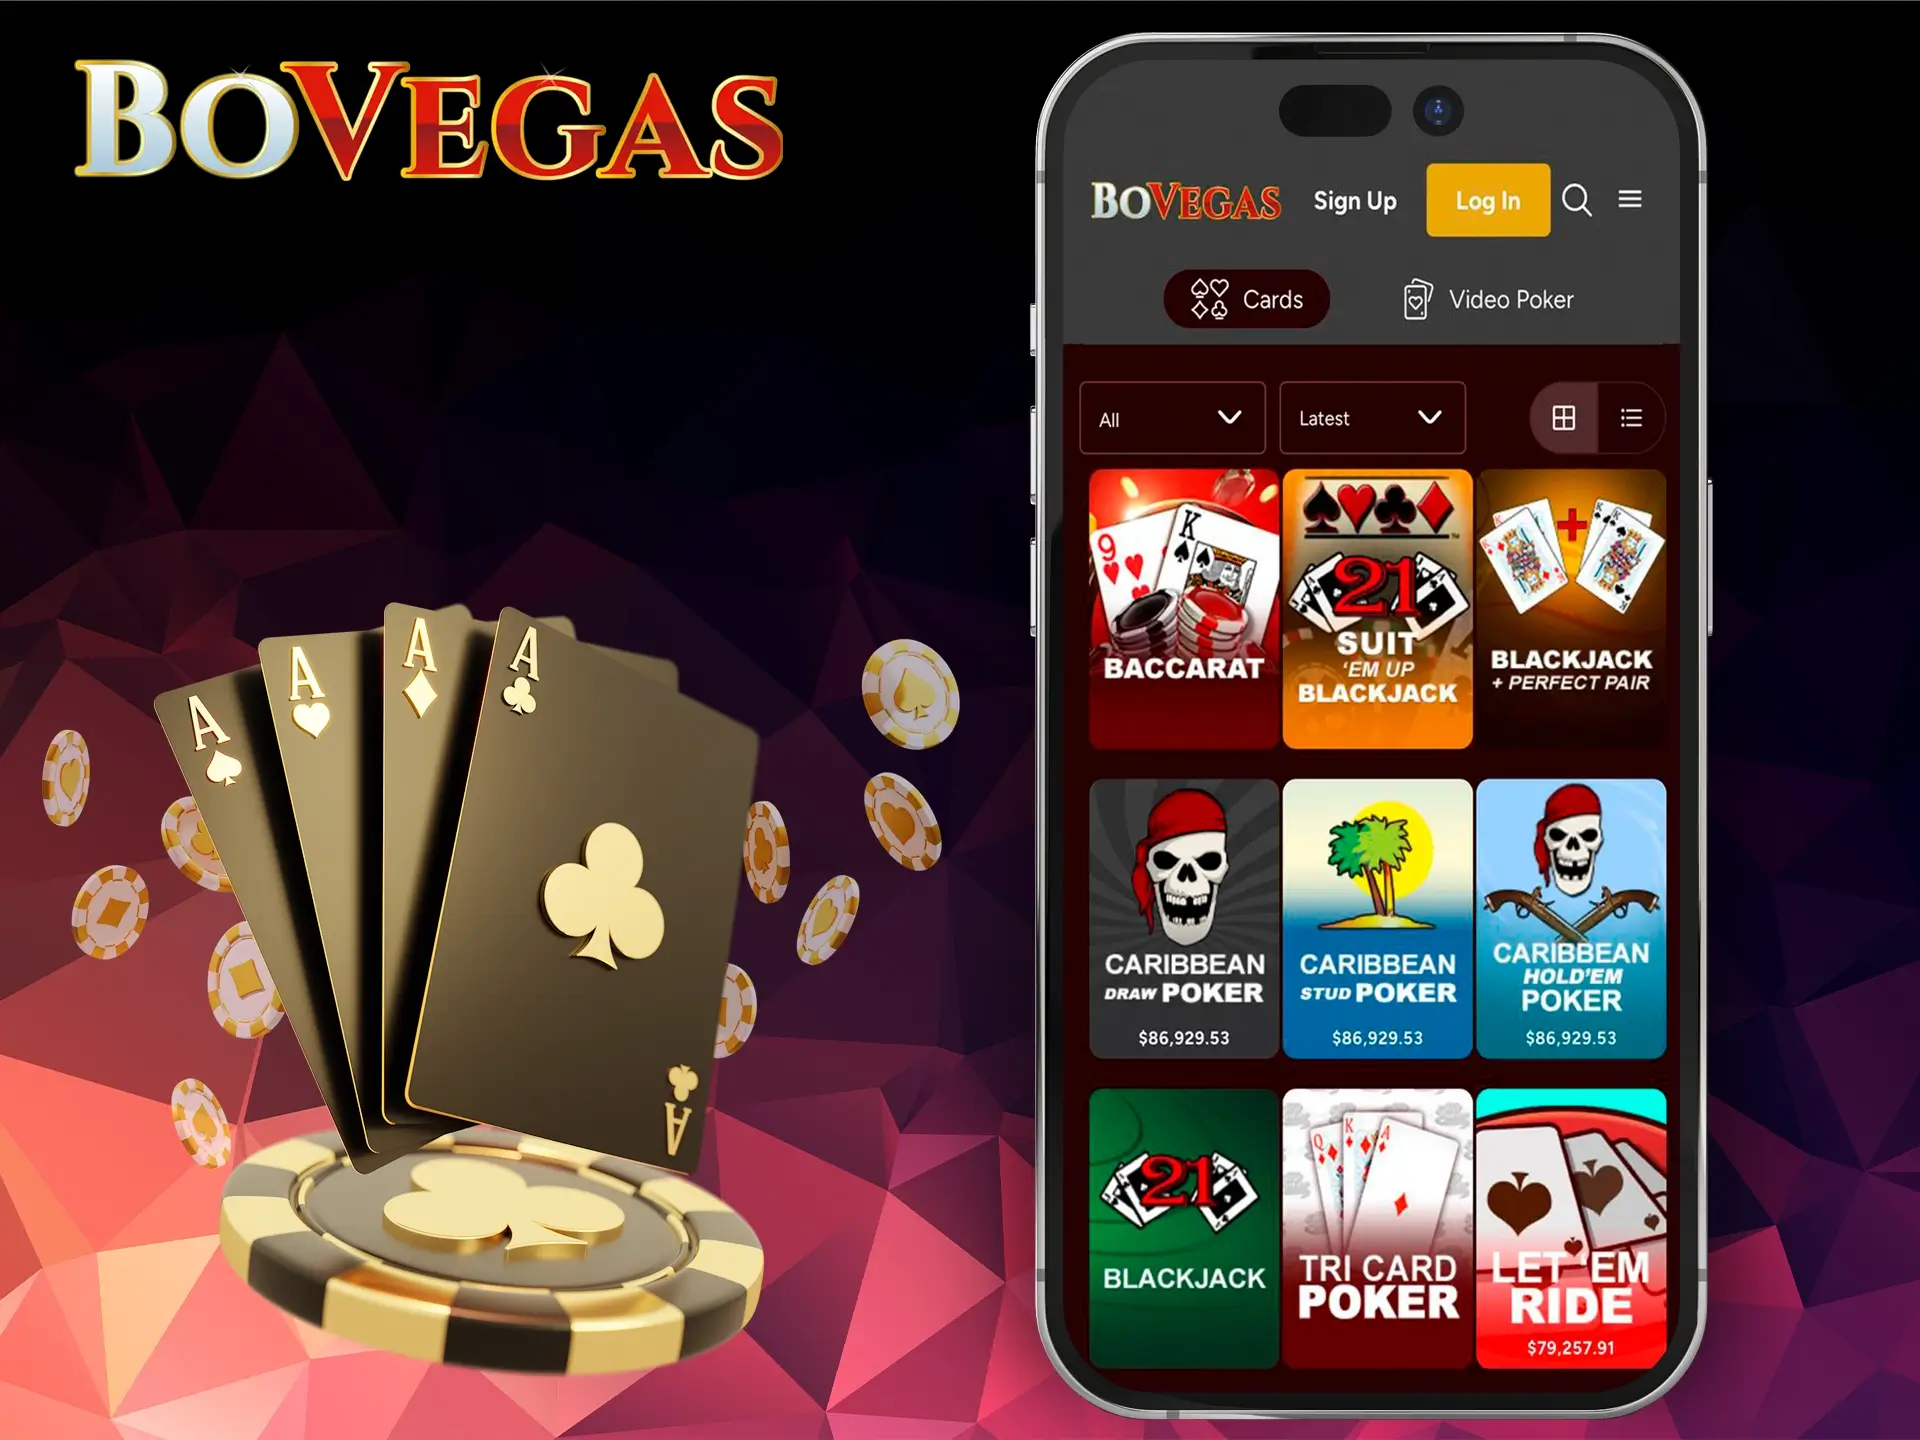 There is a large variety of table games on the BoVegas mobile version.